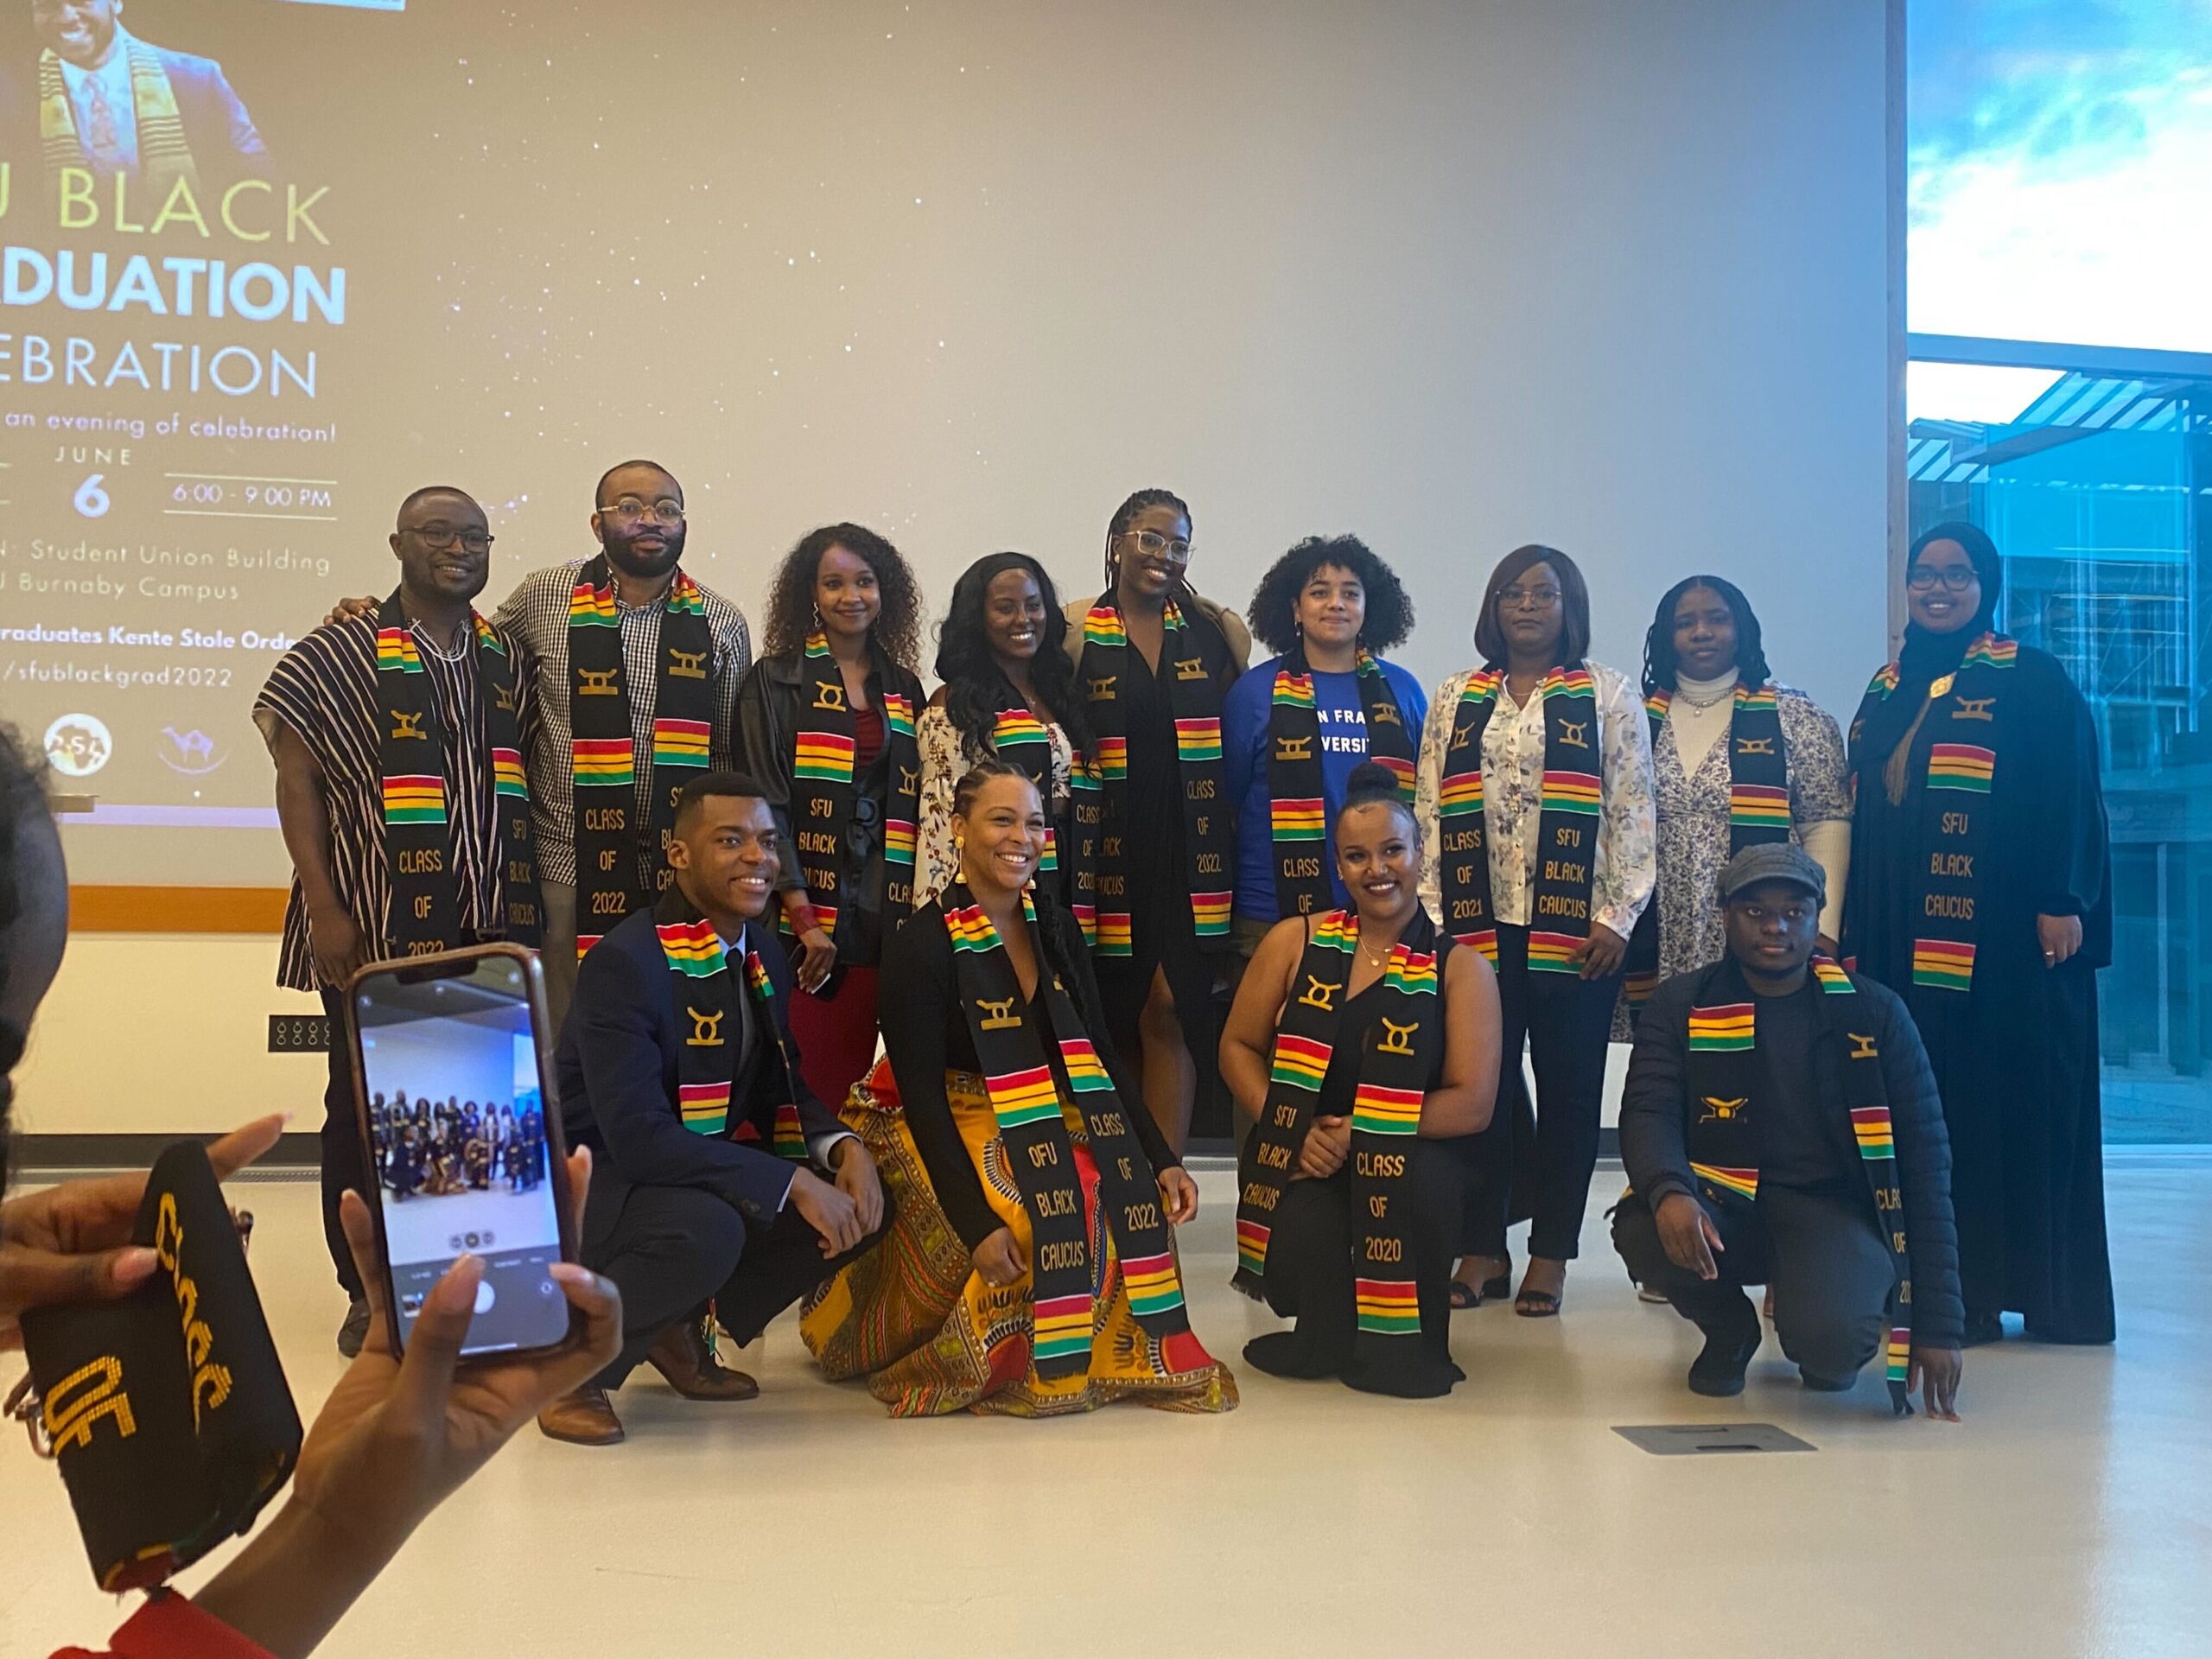 The photo shows 13 graduates wearing the Kente cloth stoles. They are huddled together smiling at the camera.